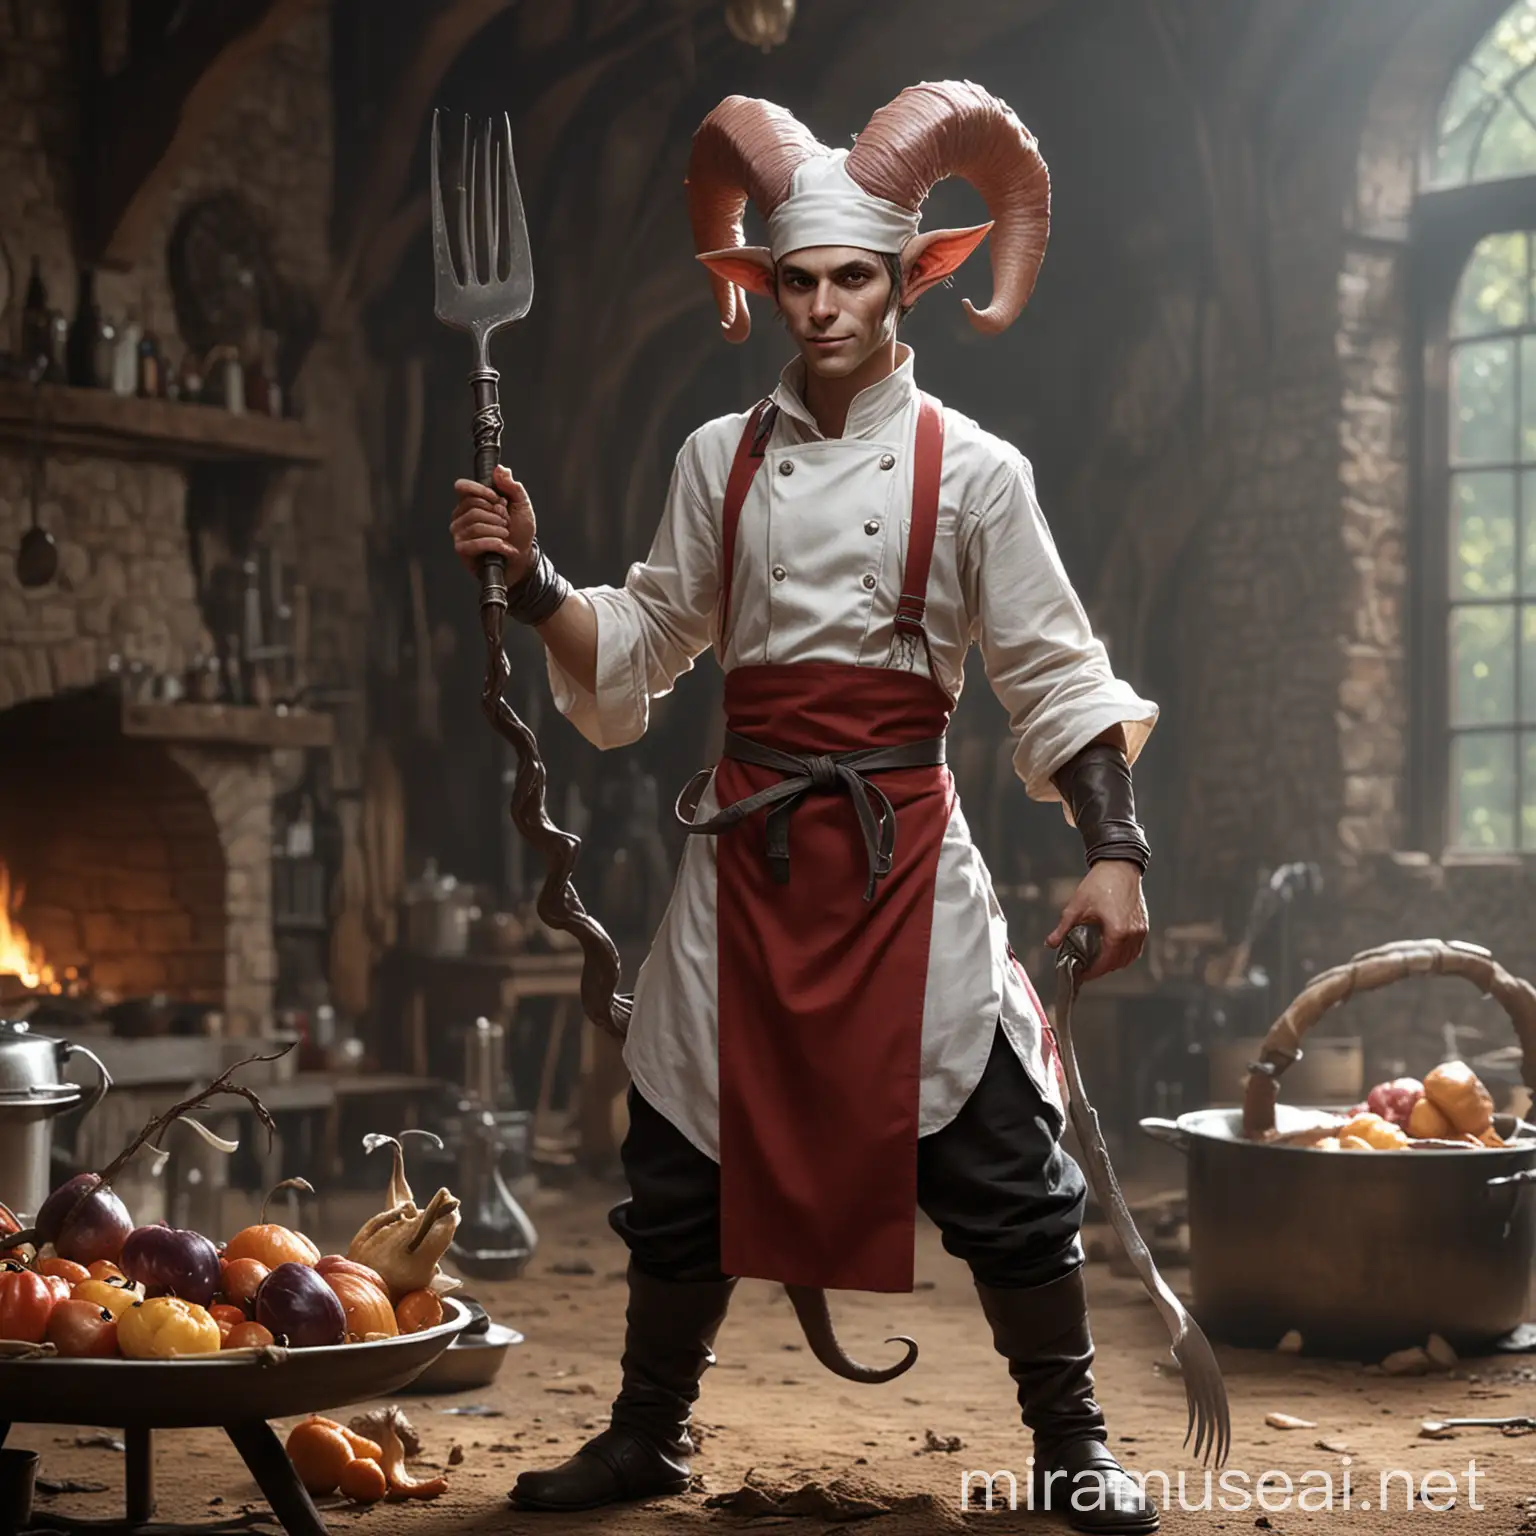 Tiny tiefling male, humanoid, charming, dnd, holding giant fork with his tail, wearing apron, wearing chef hat 